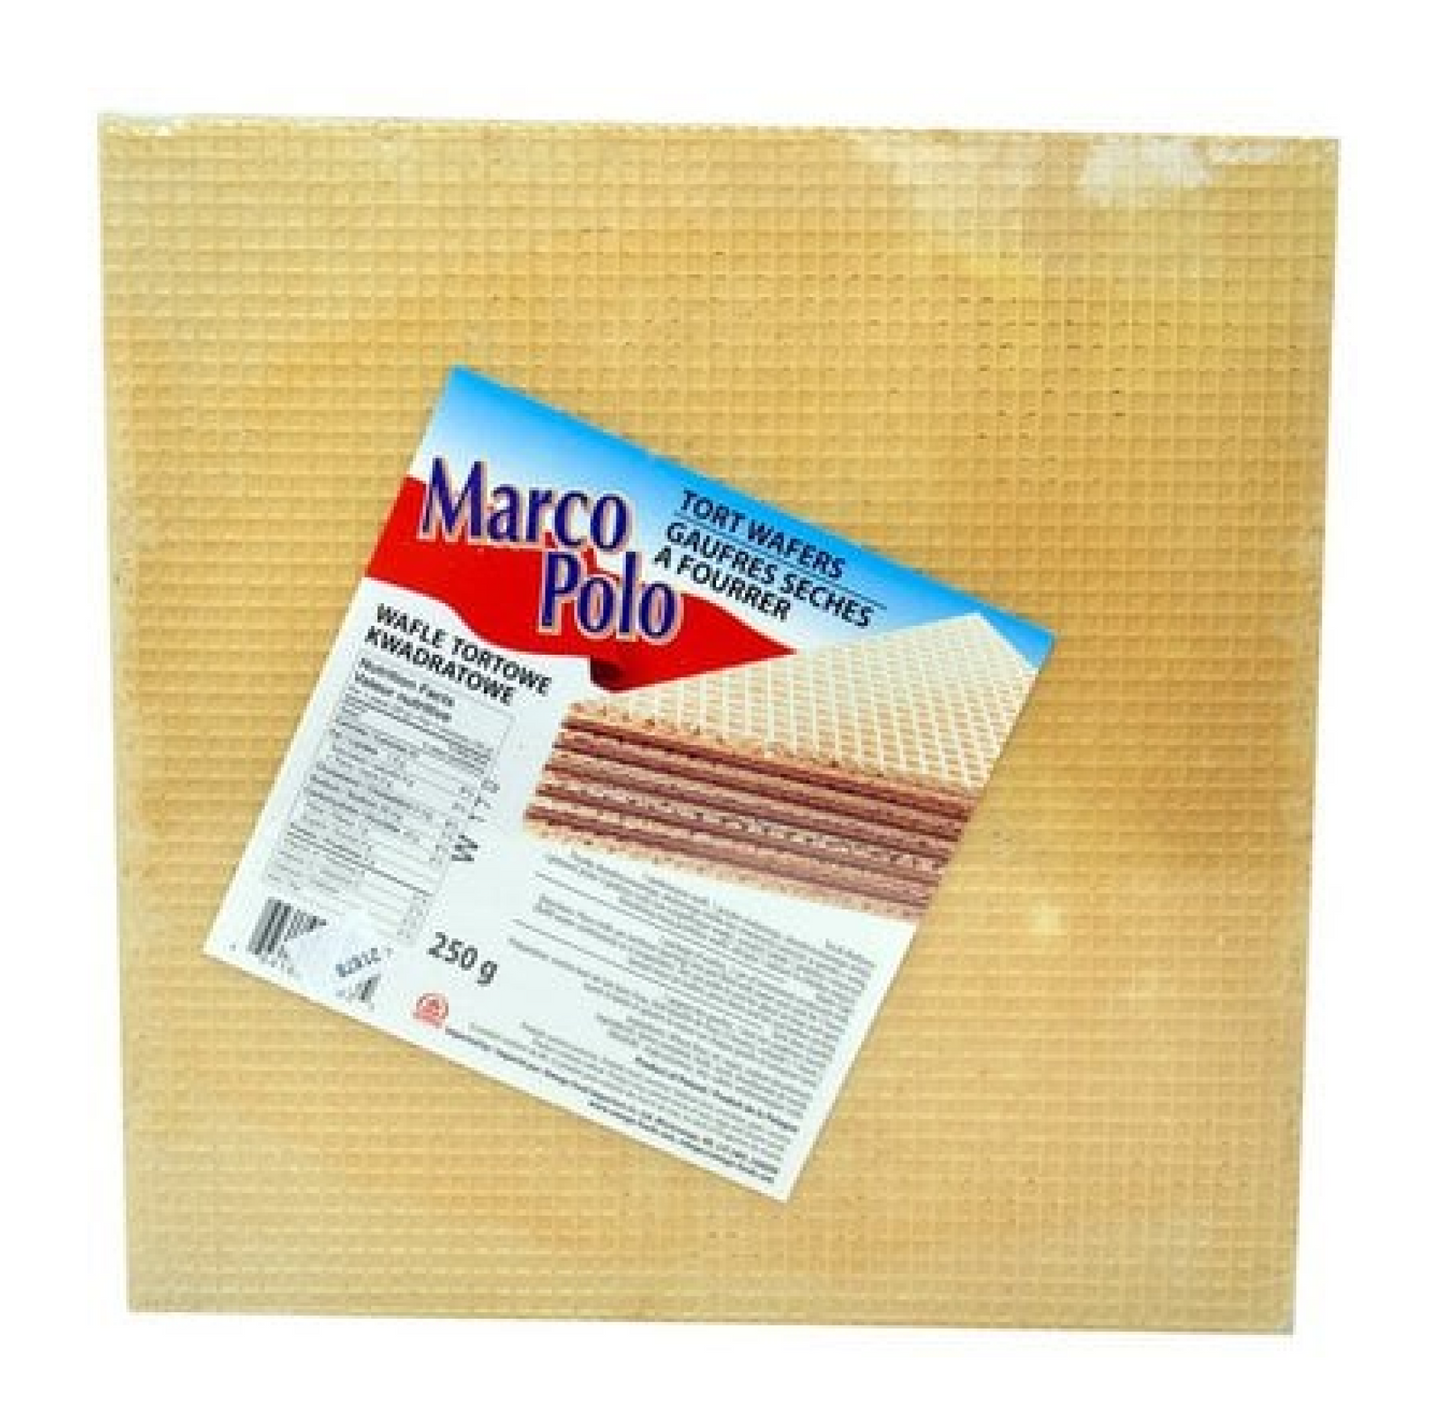 Marco Polo Tort Wafer 250g